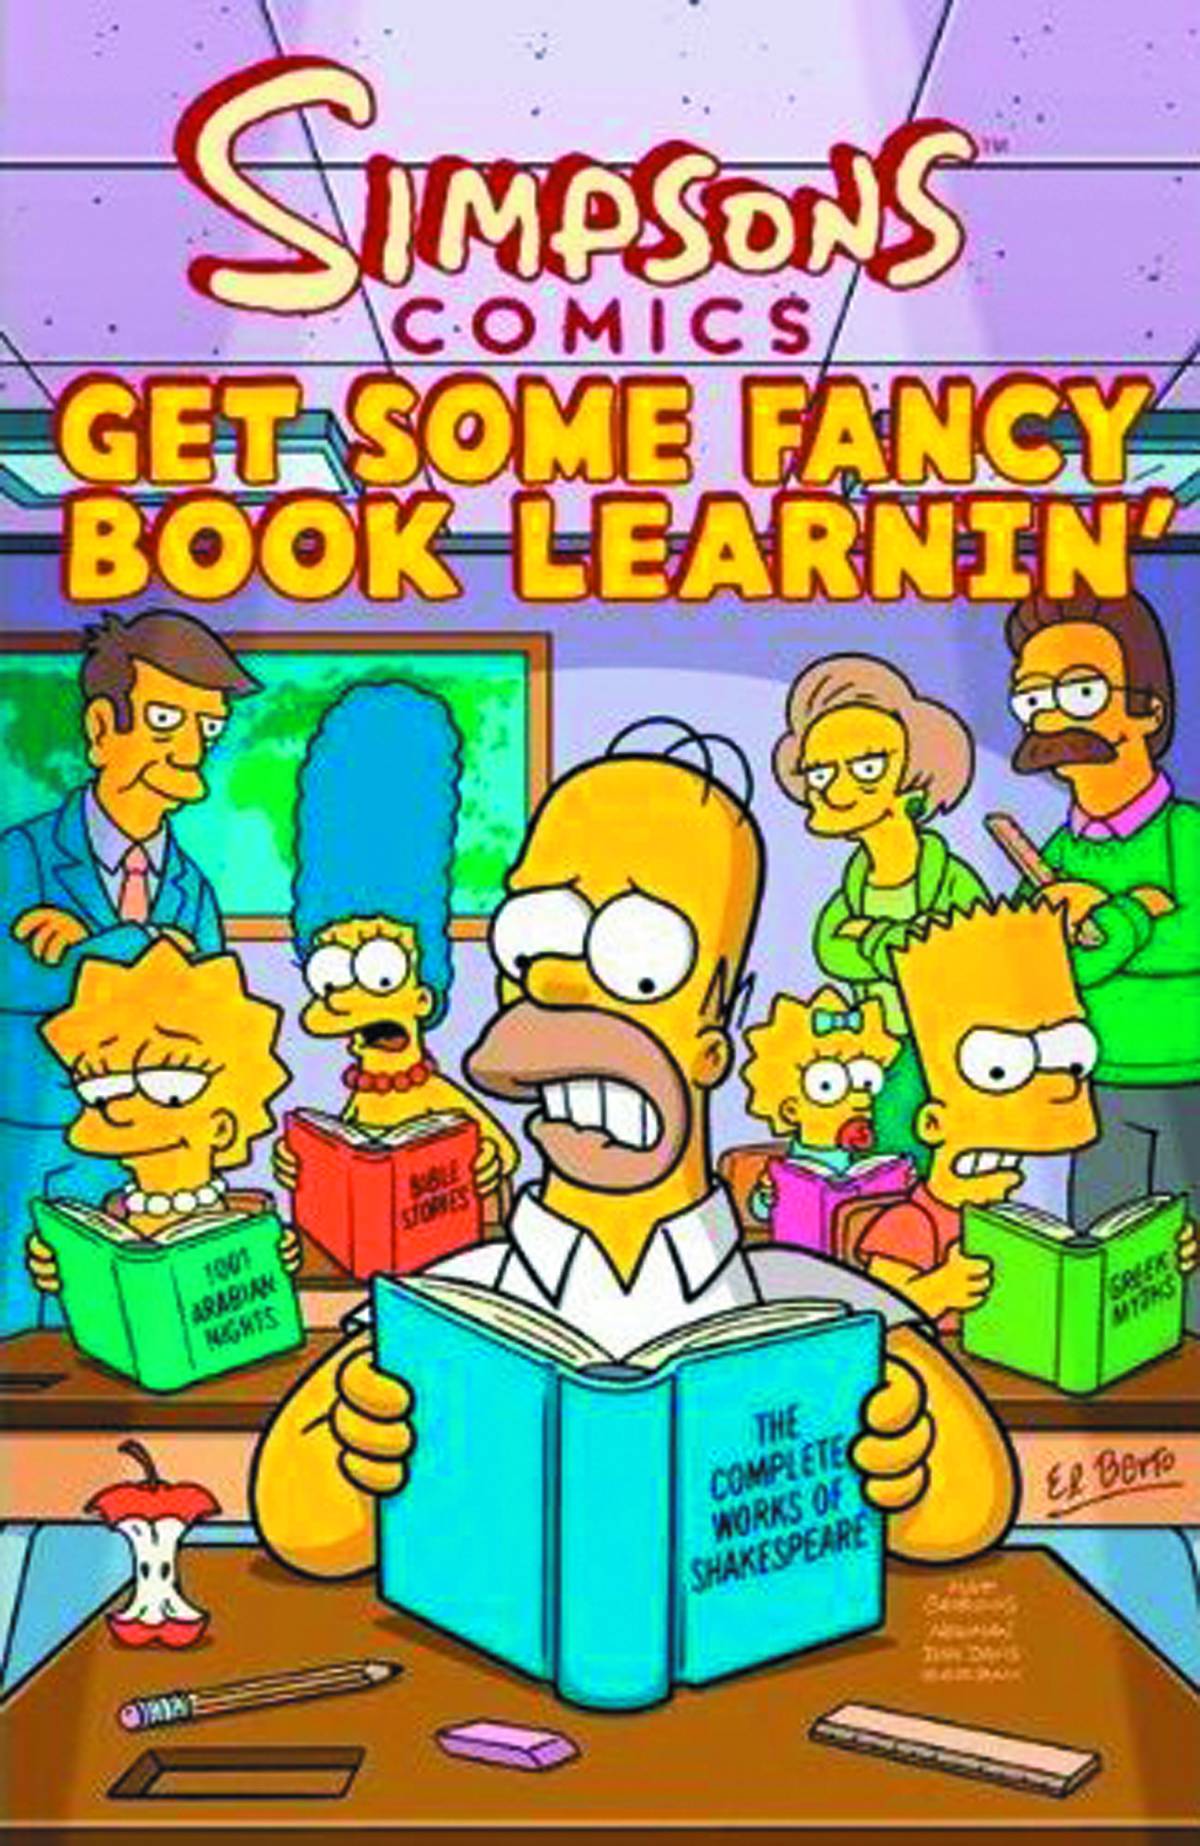 SIMPSONS COMICS [VOL 18:] GET SOME FANCY BOOK LEARNIN'